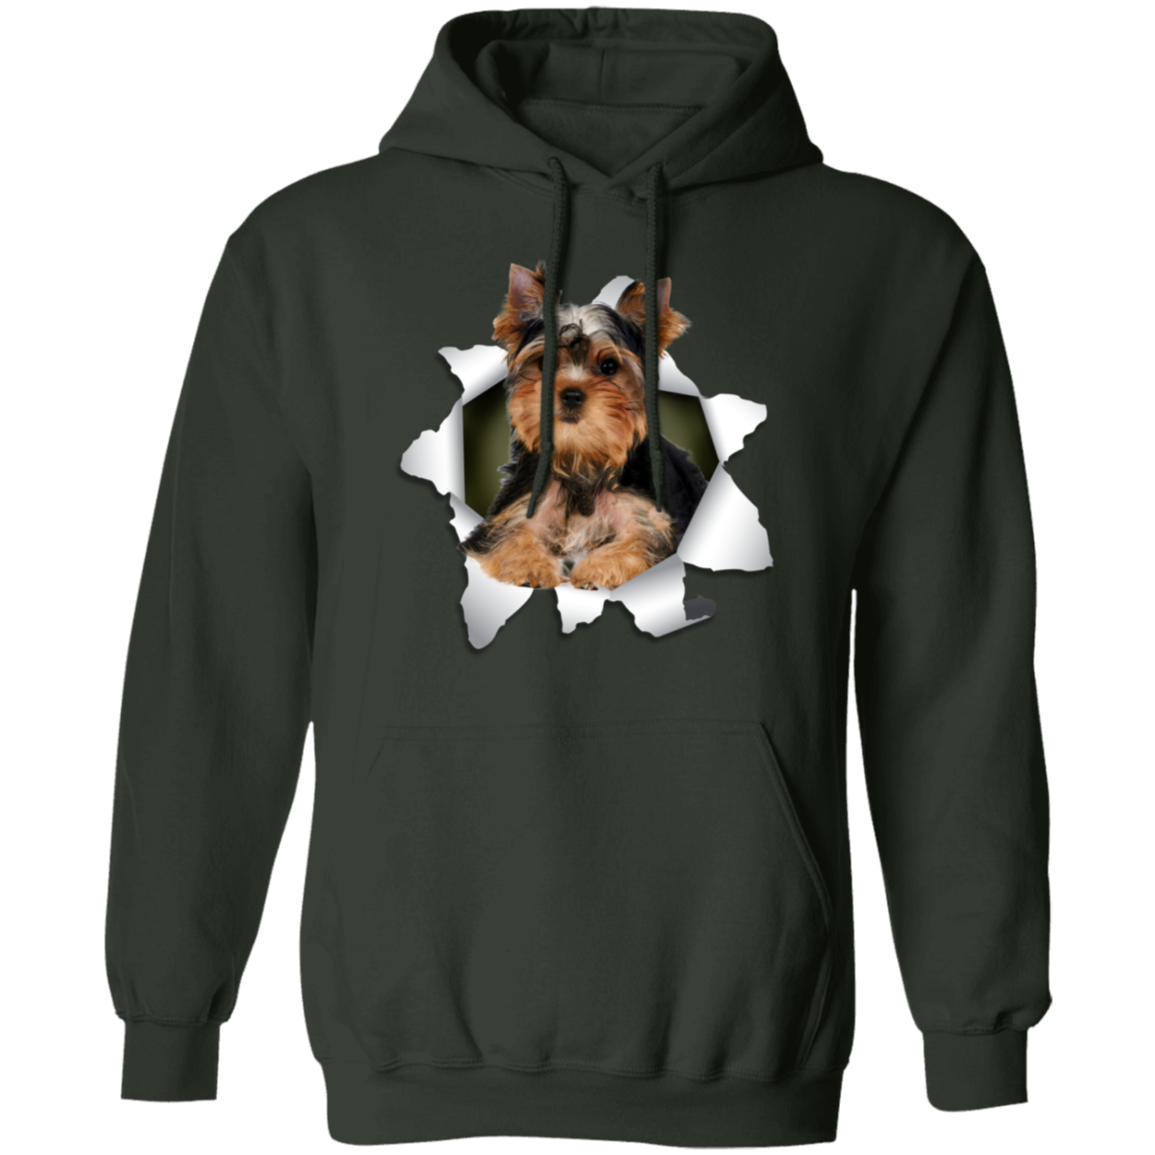 Canine's World Sweatshirts YORKSHIRE TERRIER 3D Pullover Hoodie 8 oz. Ultimate Shield